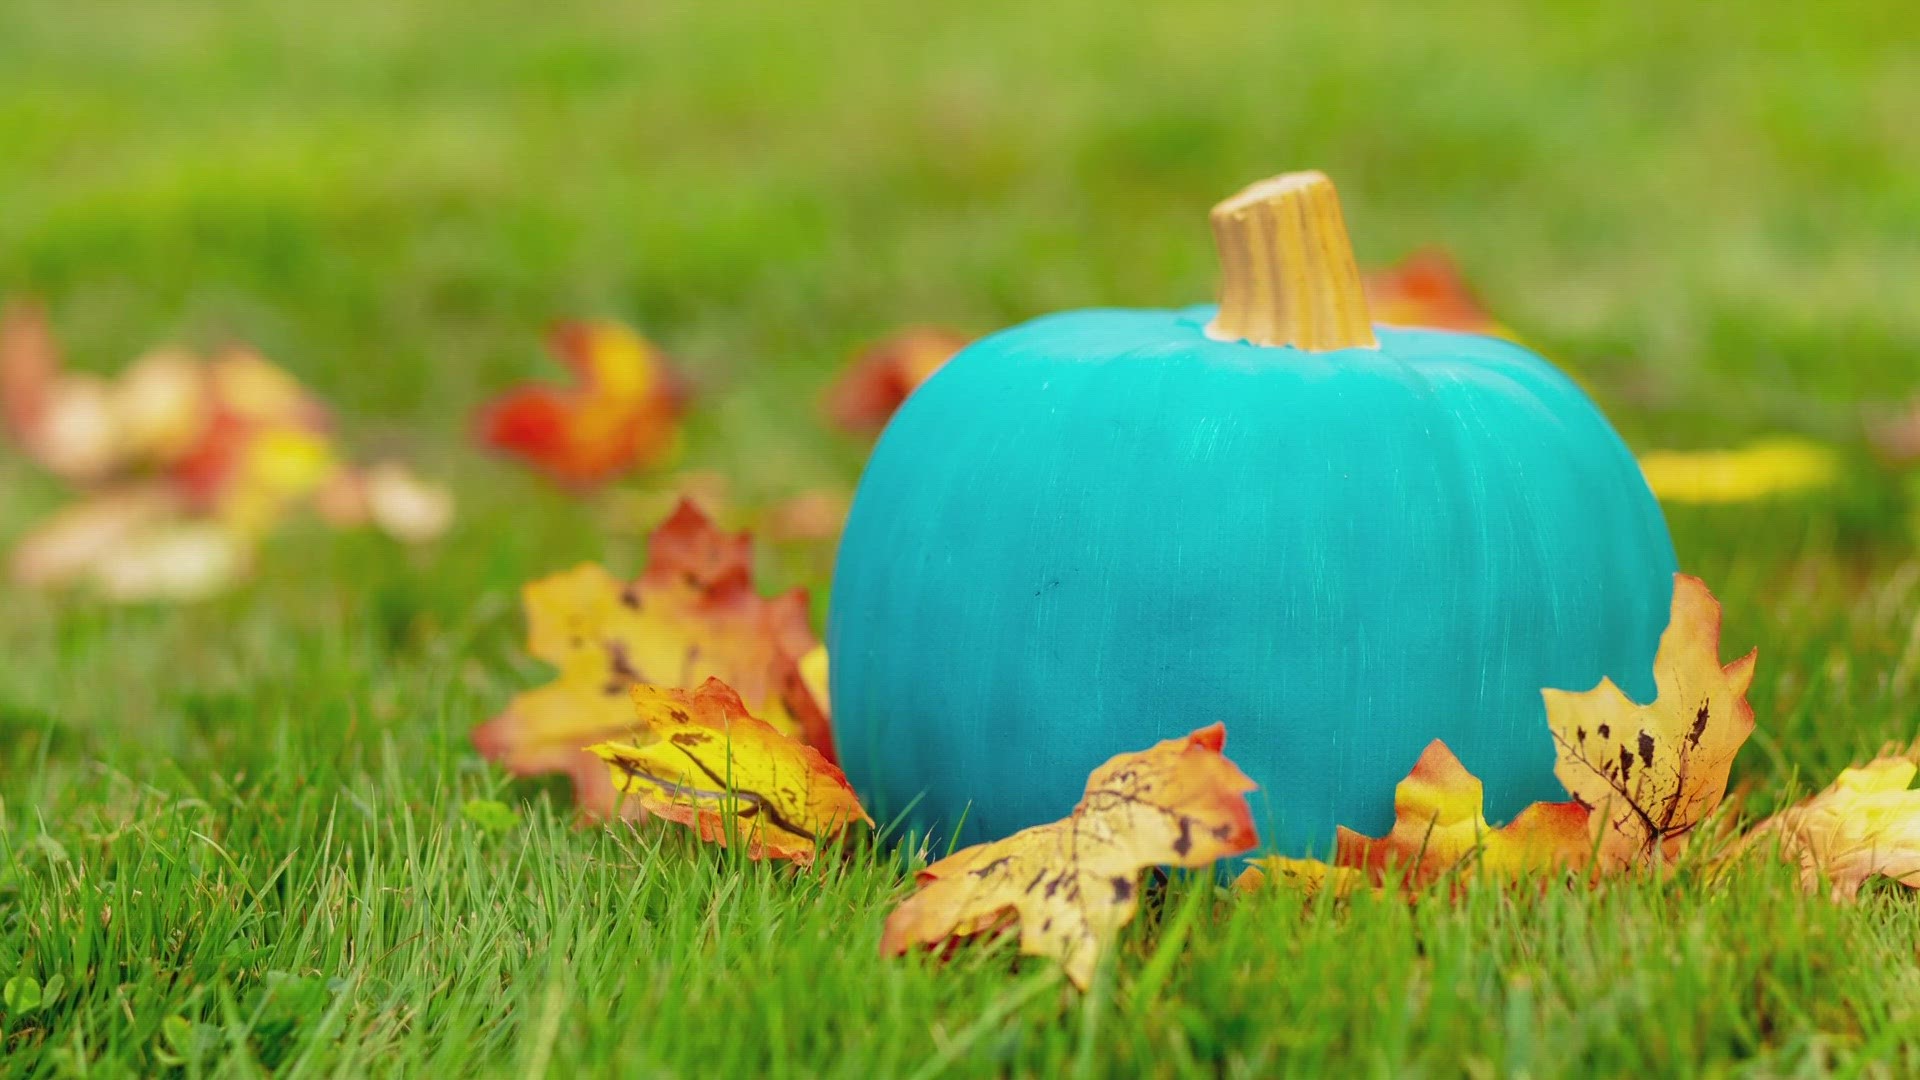 A teal pumpkin on a doorstep is a signal that the homeowner as non-food treats for kids with food allergies.